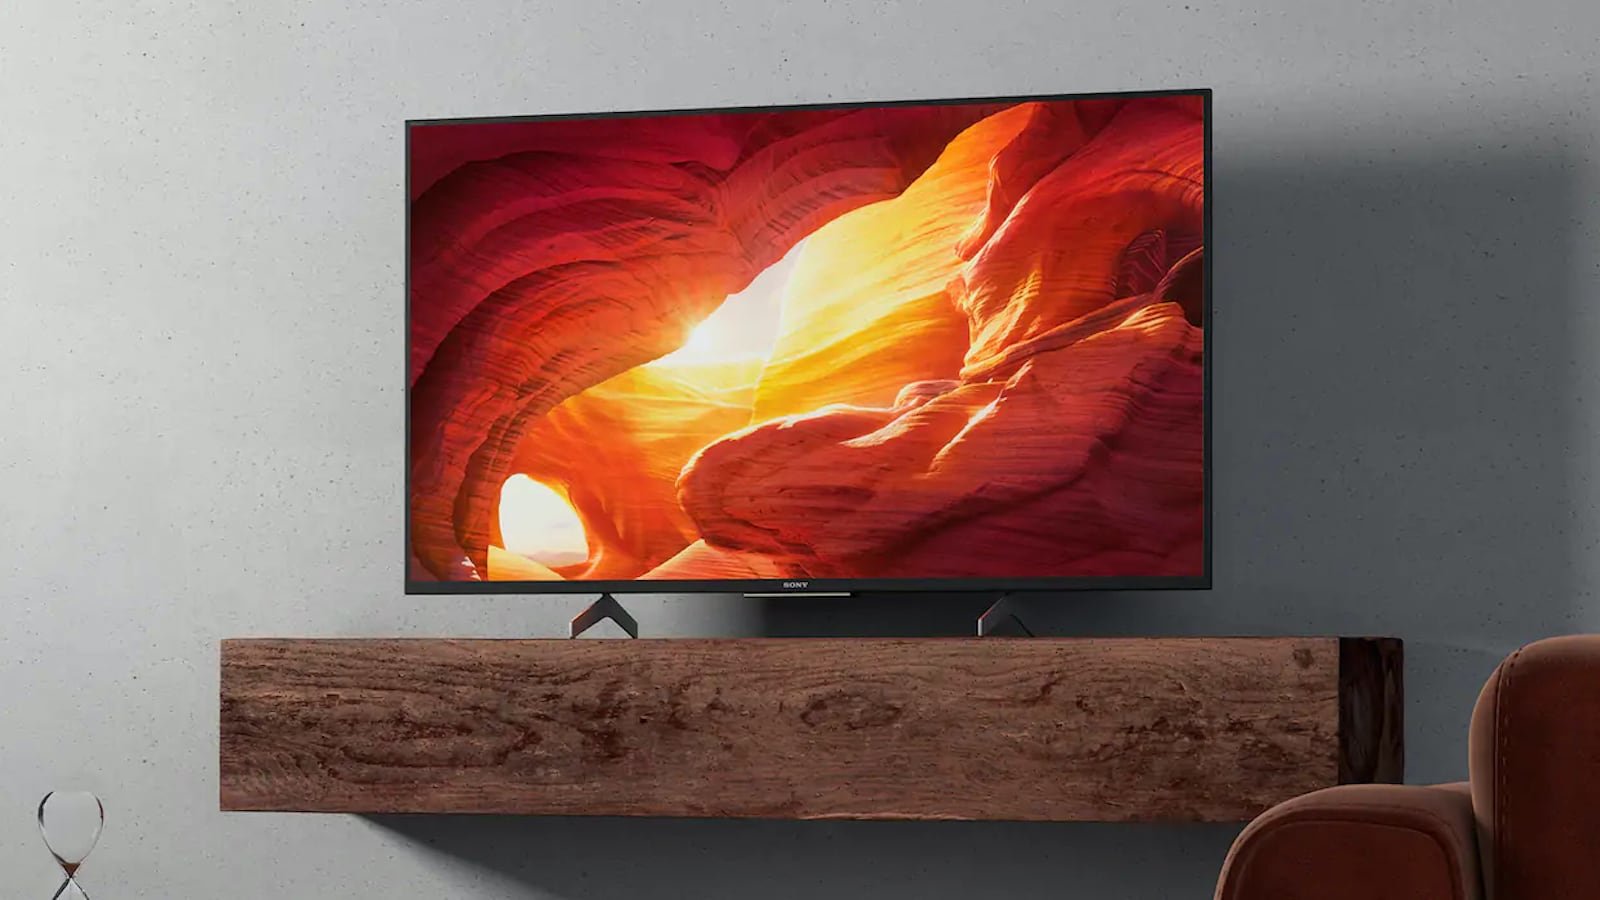 Sony XH85 4K TV has a compact size with modern design